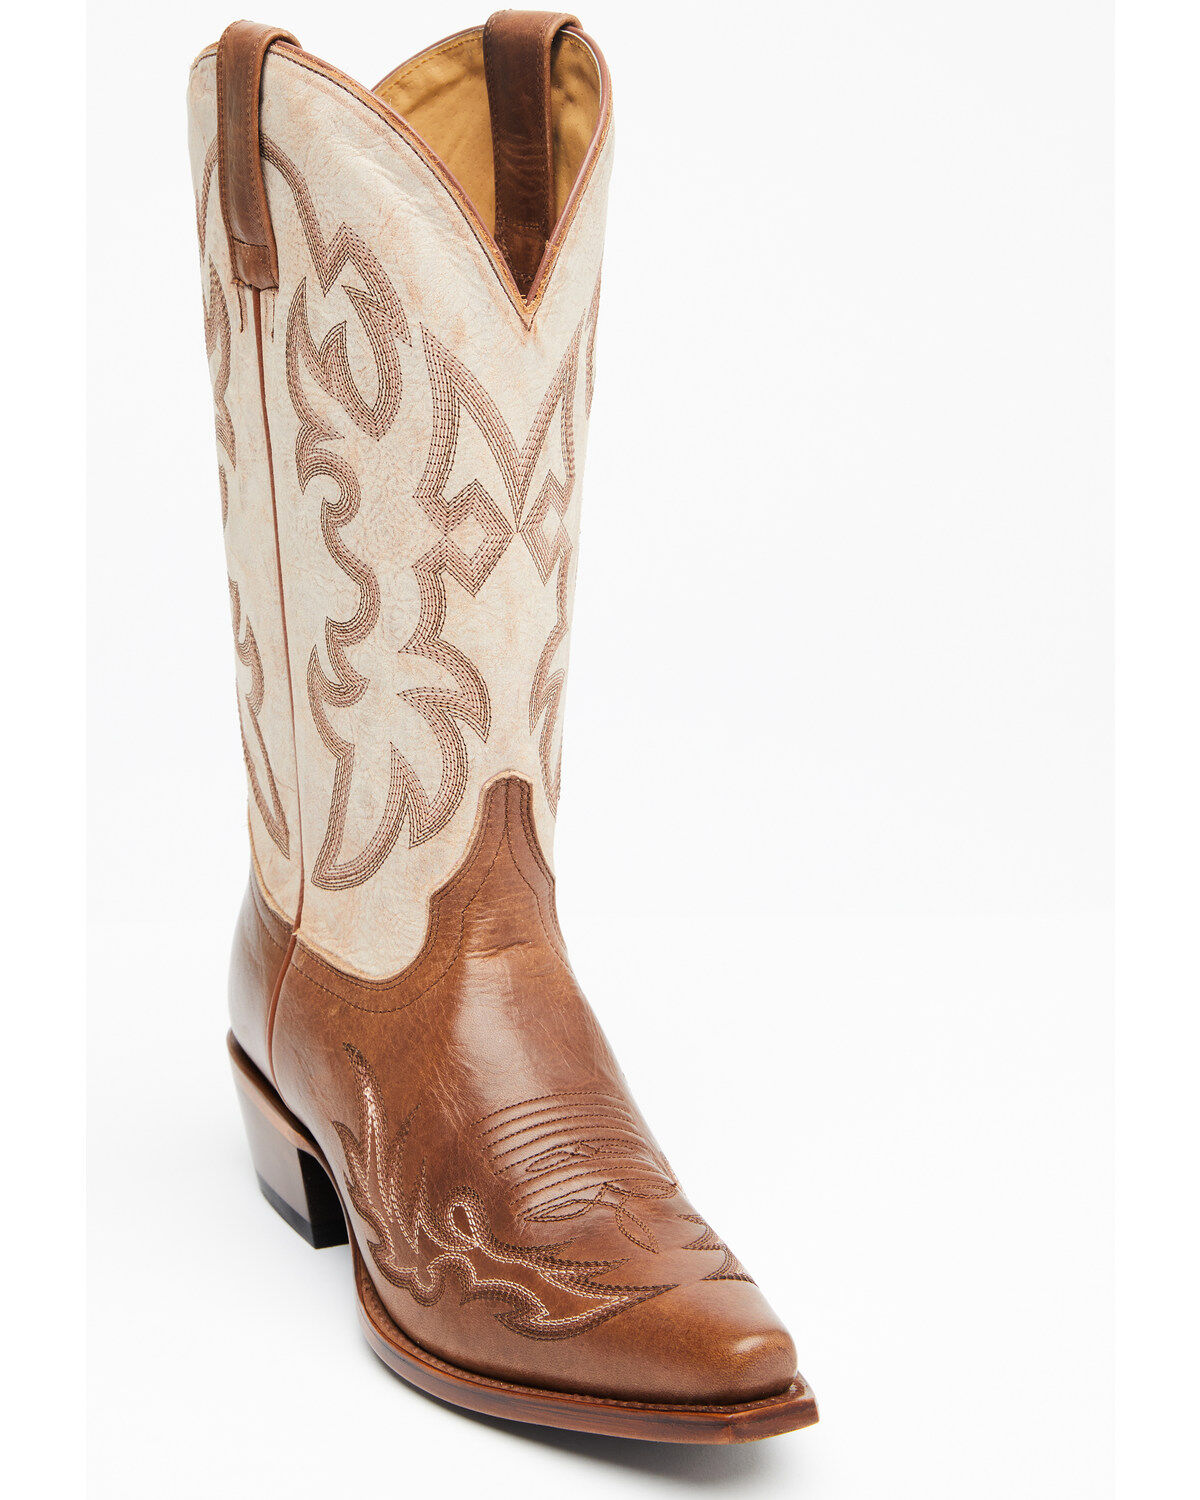 size 16 ee cowboy boots